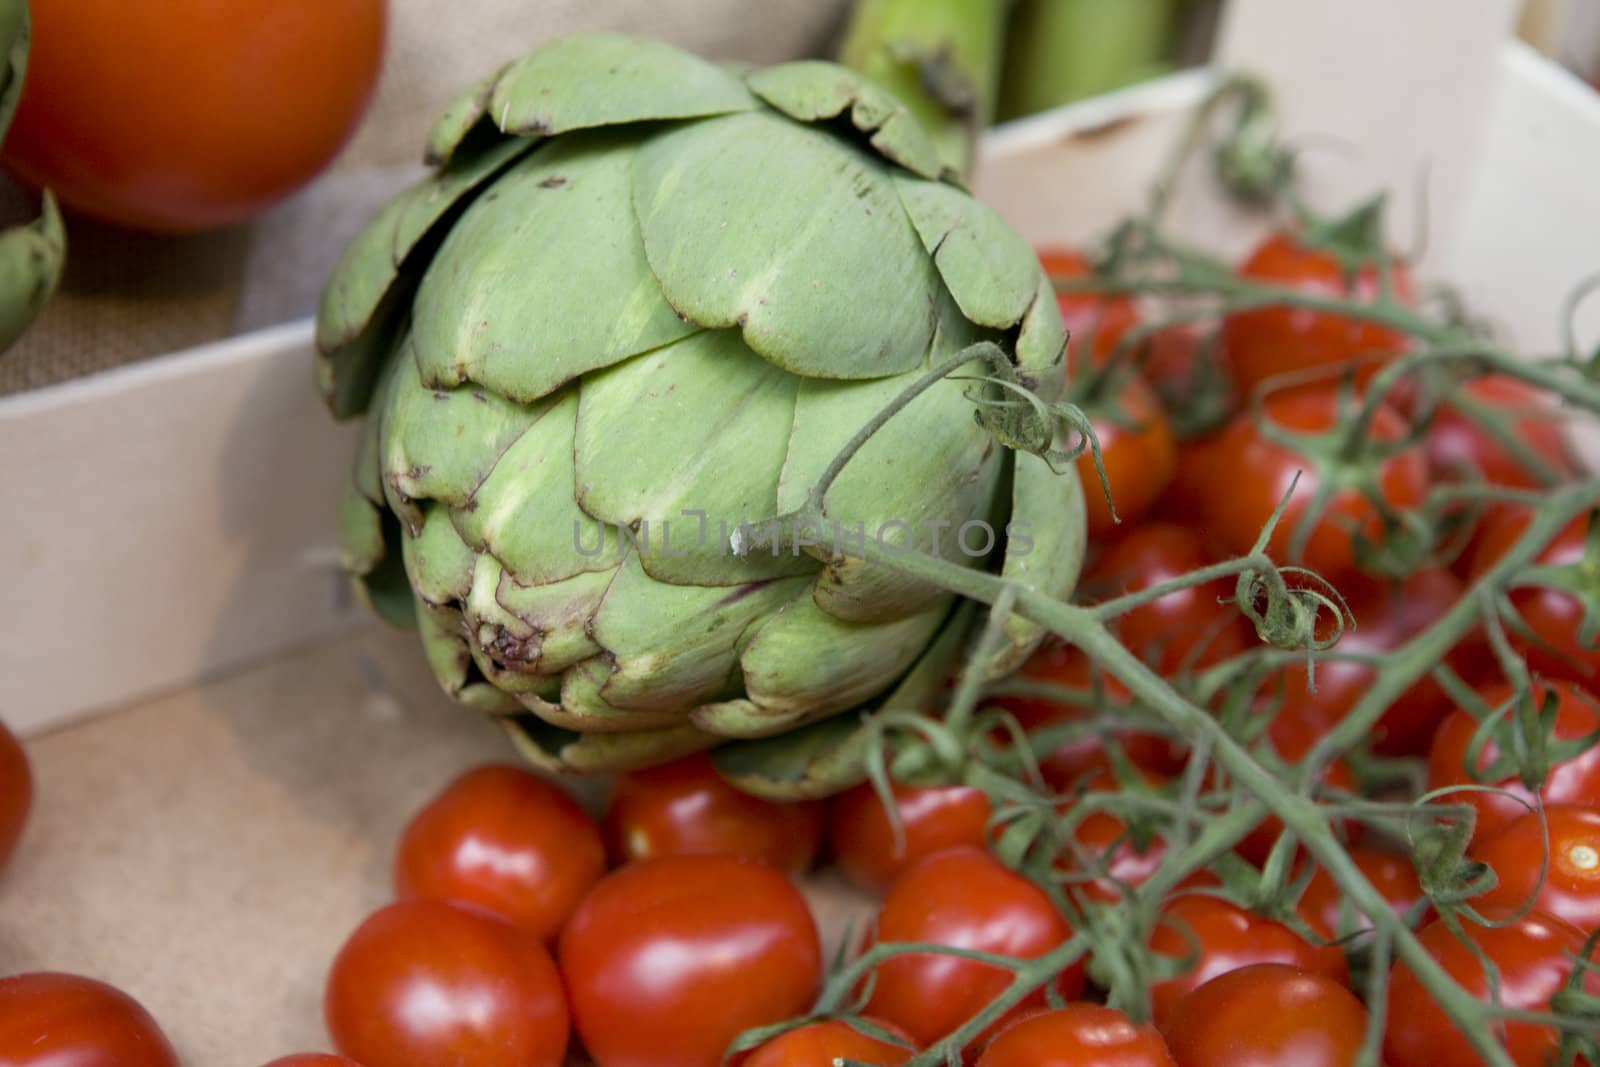 vegetables in grossery shop.  Artichoke and tomato